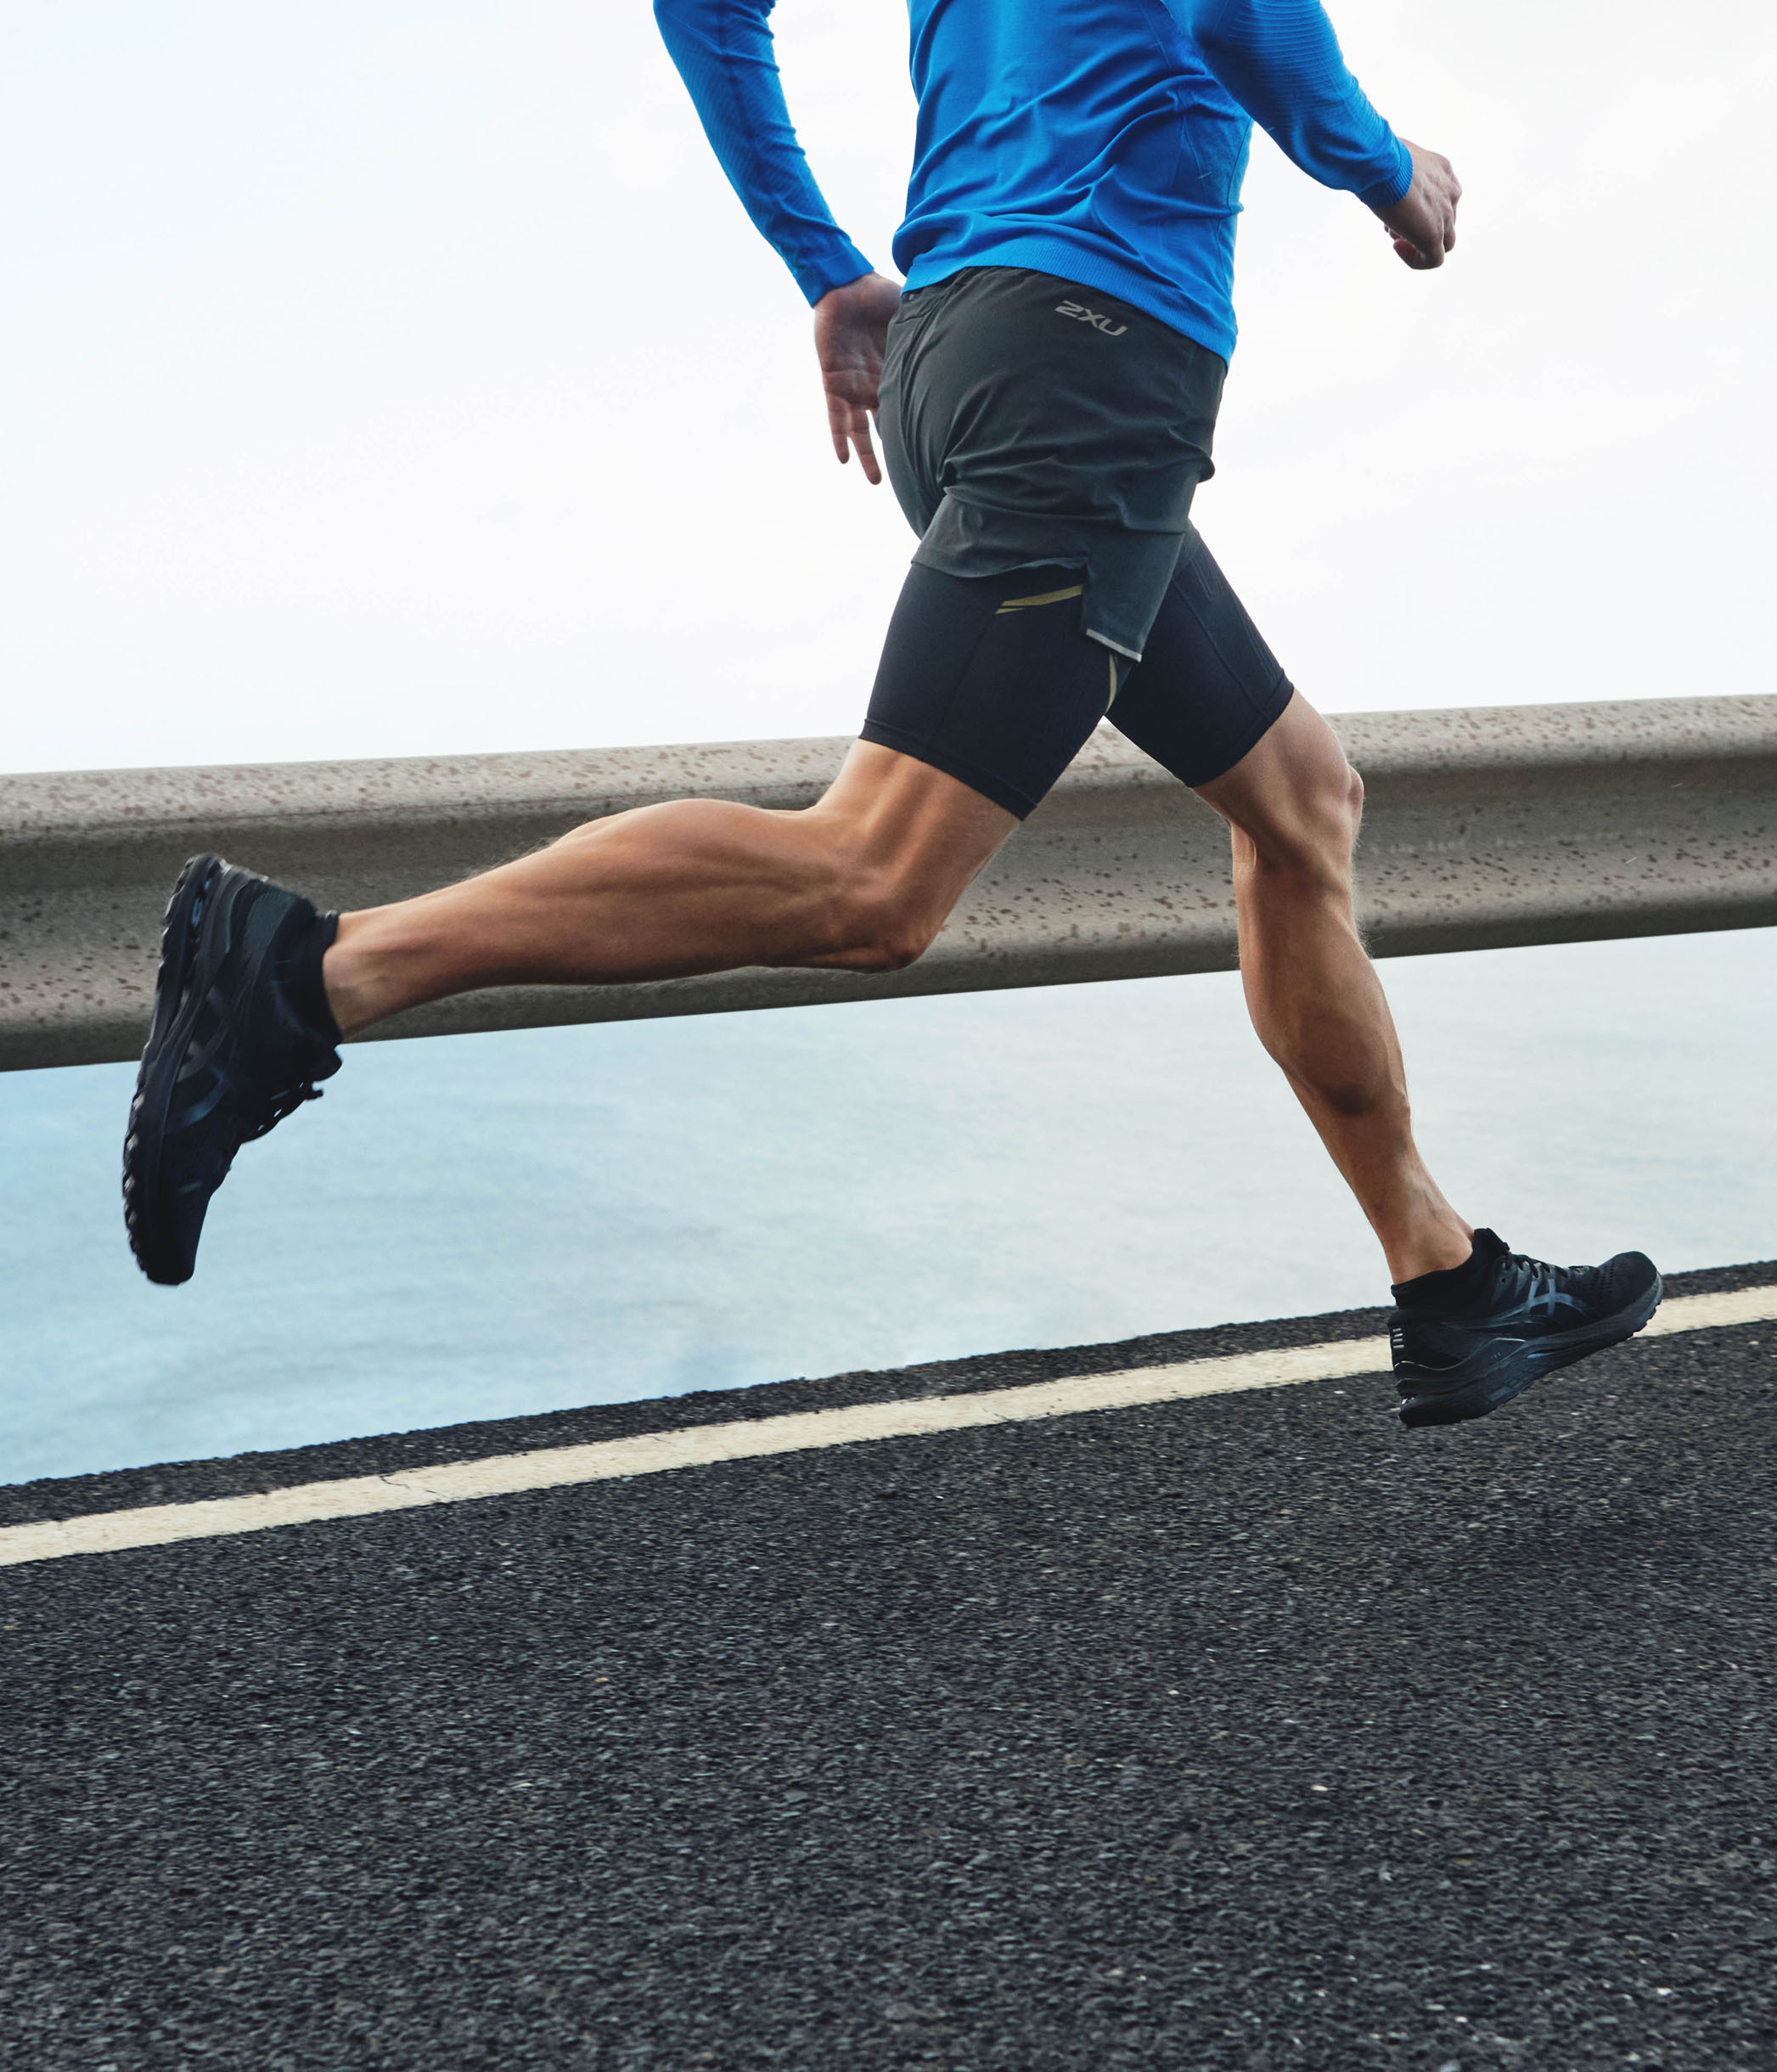 How to pick the right running shoe to improve your performance